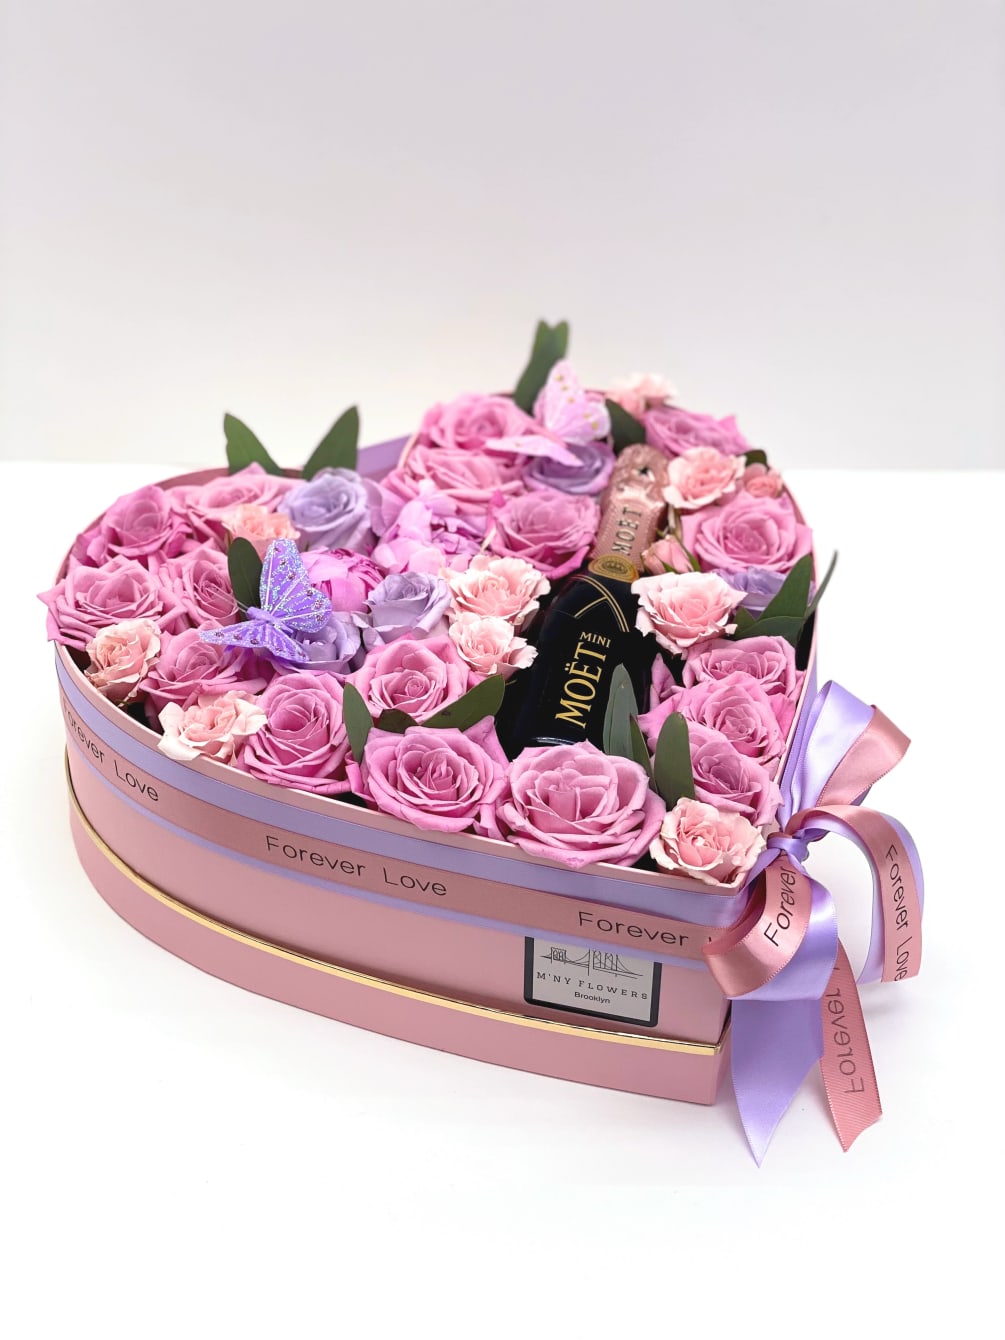 The arrangement will be delivered approximately as pictured. 